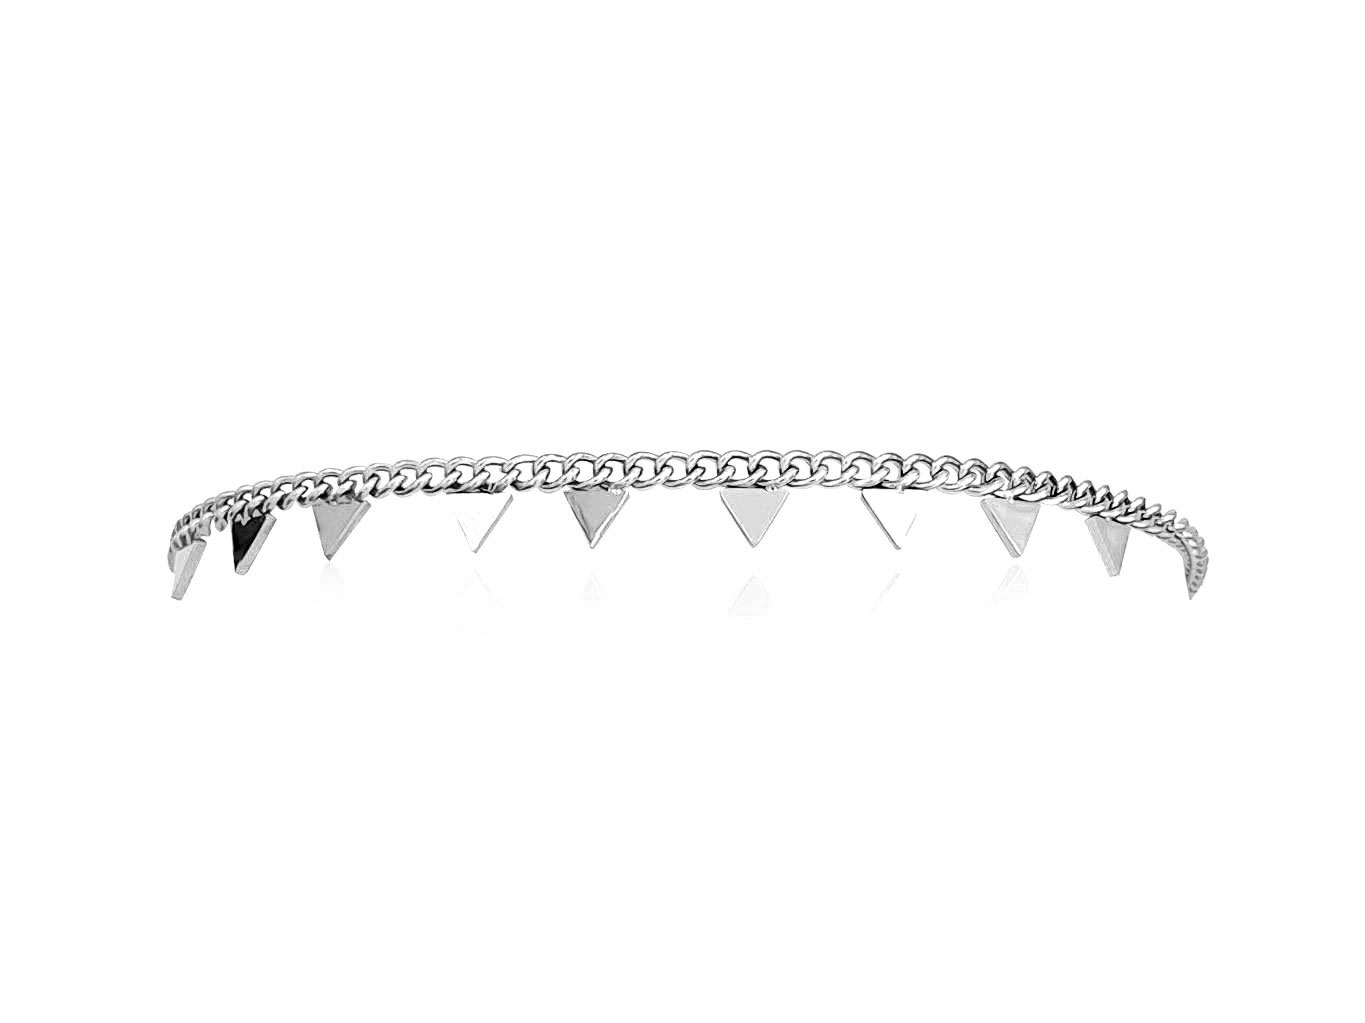 Triangle Silver Plated Anklet - Adema